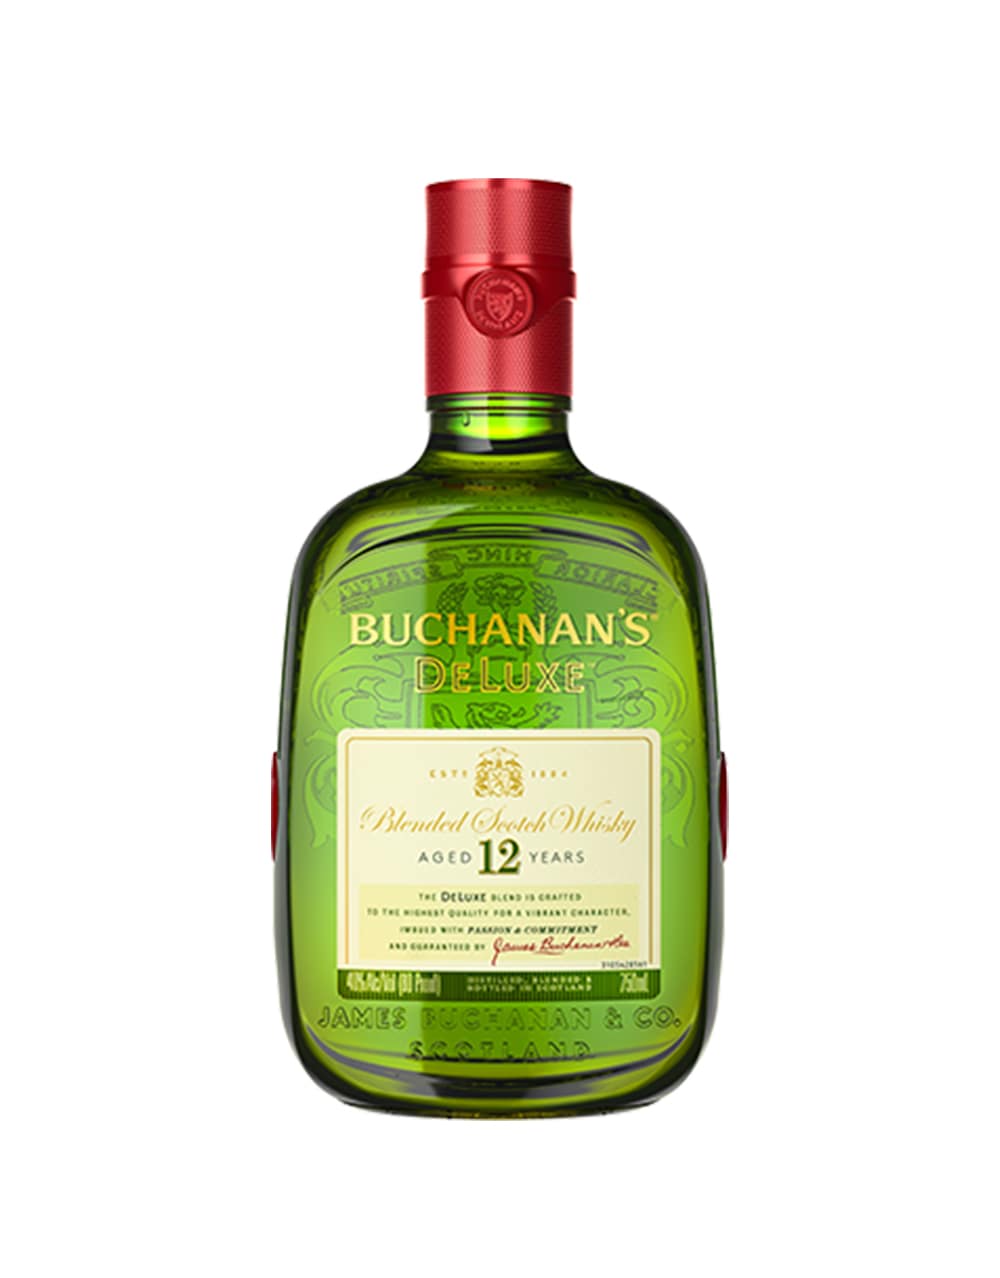 Buchanan's DeLuxe 12 Years old Scotch Whisky